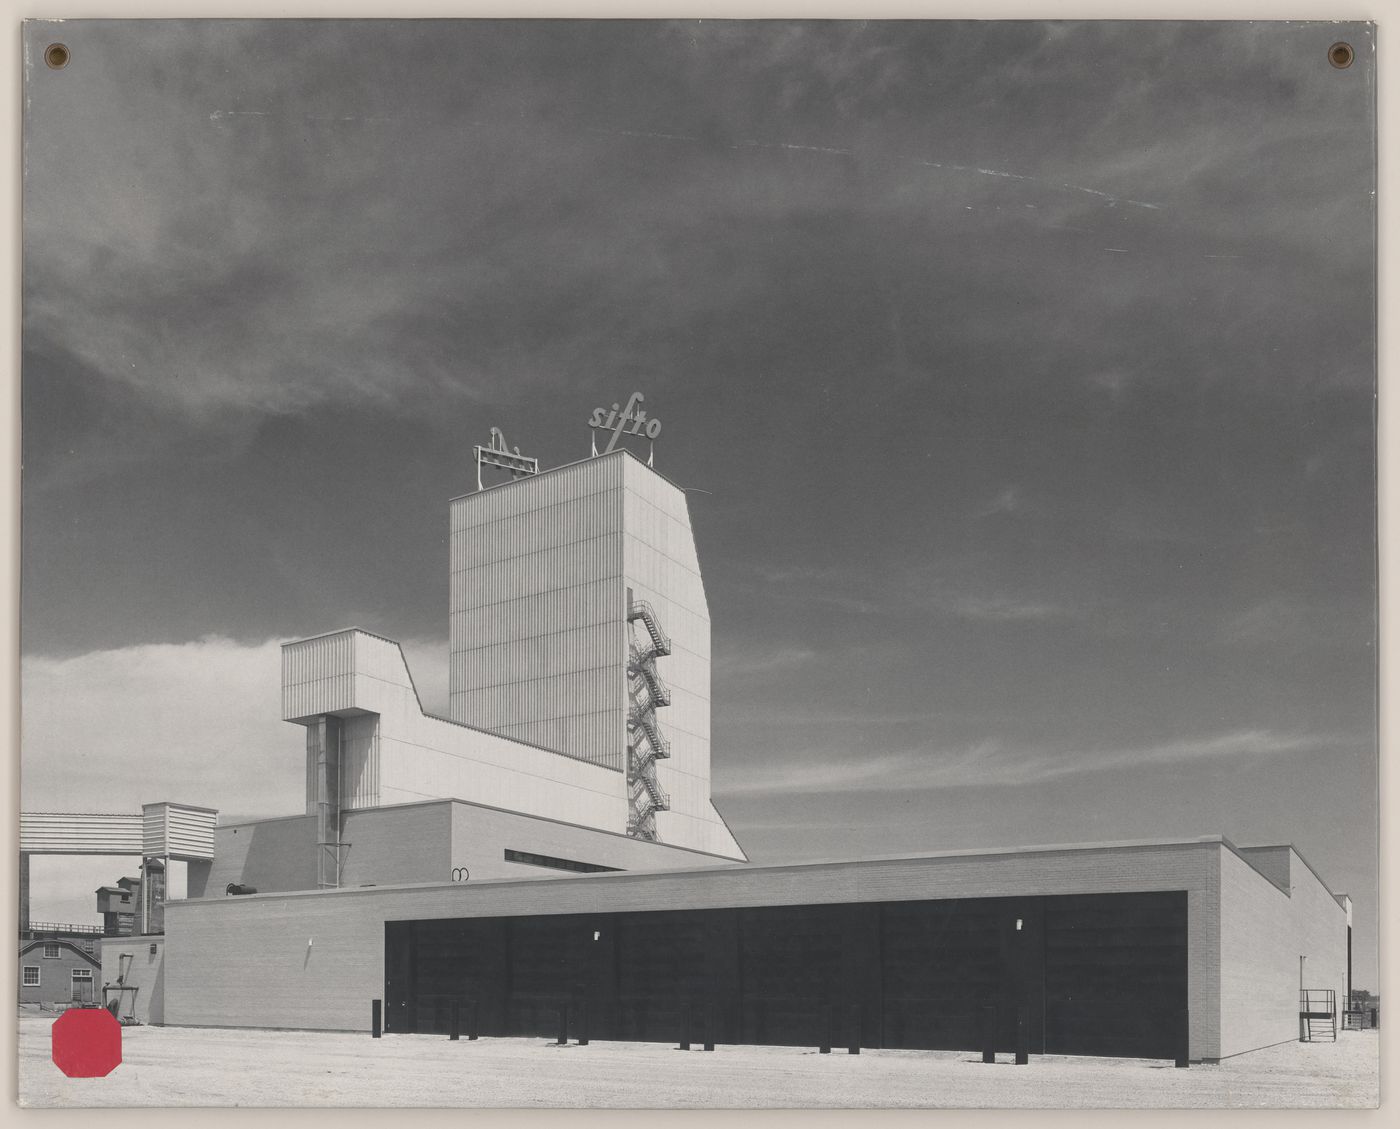 Photographic panel showing finished building exterior for Domtar Chemicals Limited, Sifto Salt Division Mill and Warehouse, Goderich, Ontario, Canada